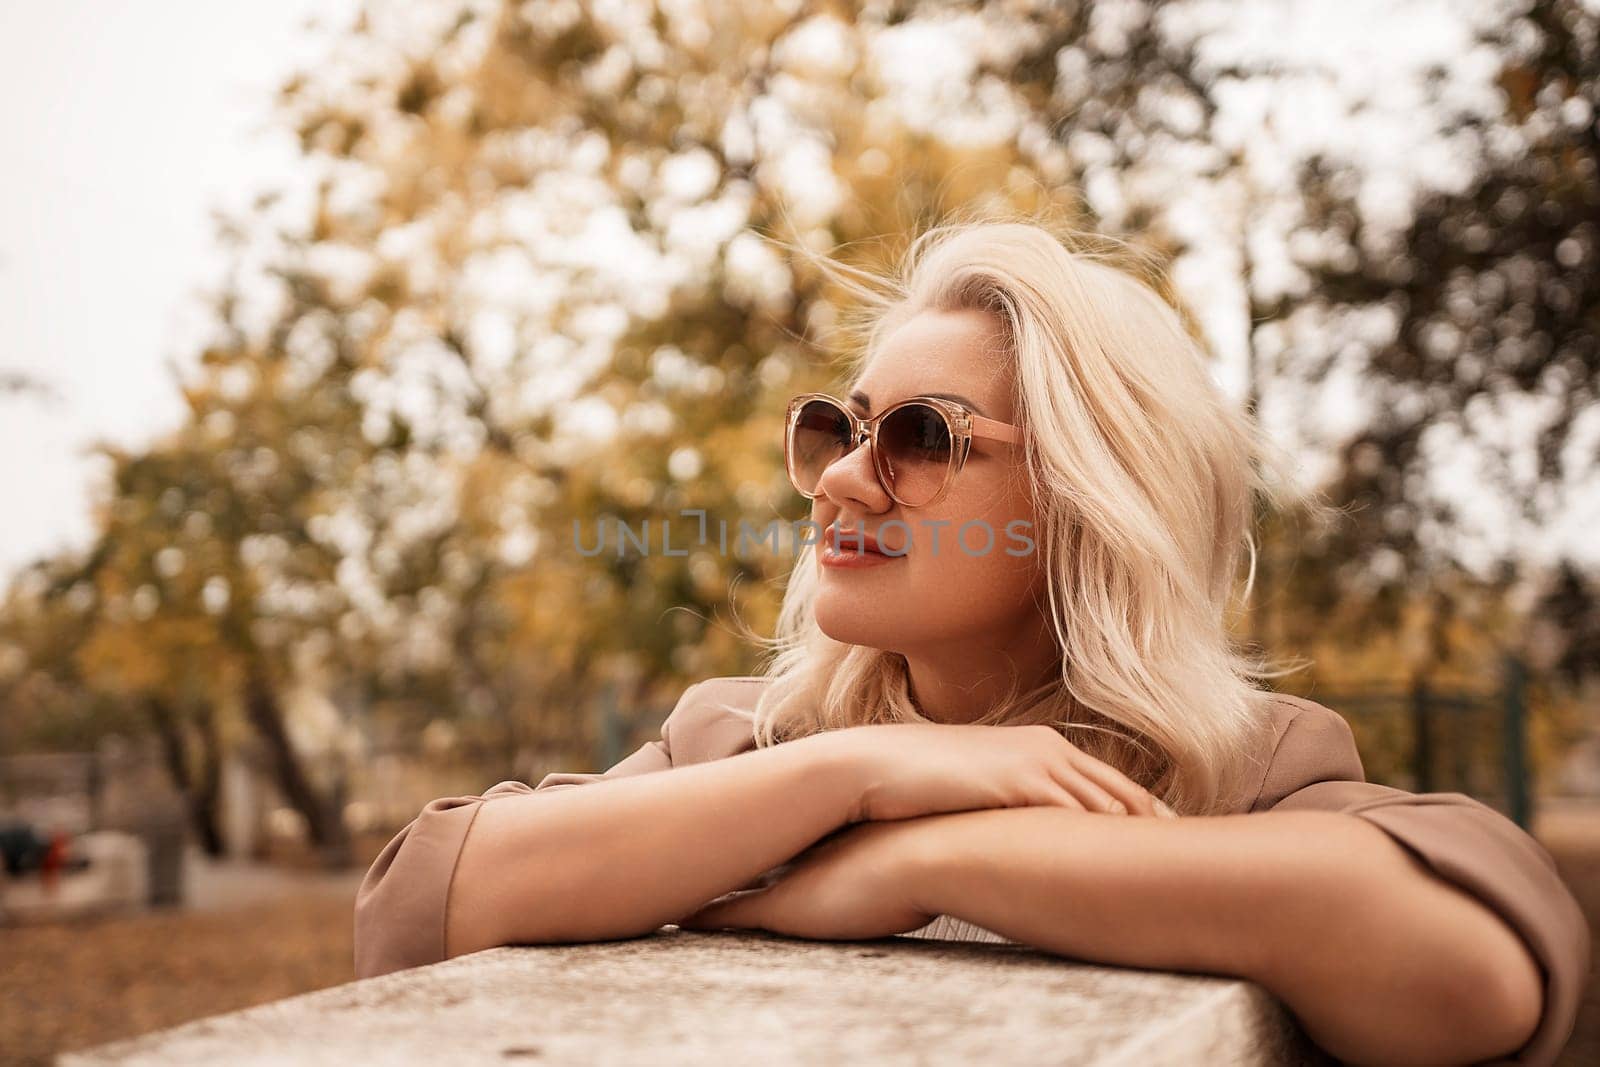 A blonde woman wearing sunglasses is sitting on a bench in a park. She is looking at the camera with a smile on her face